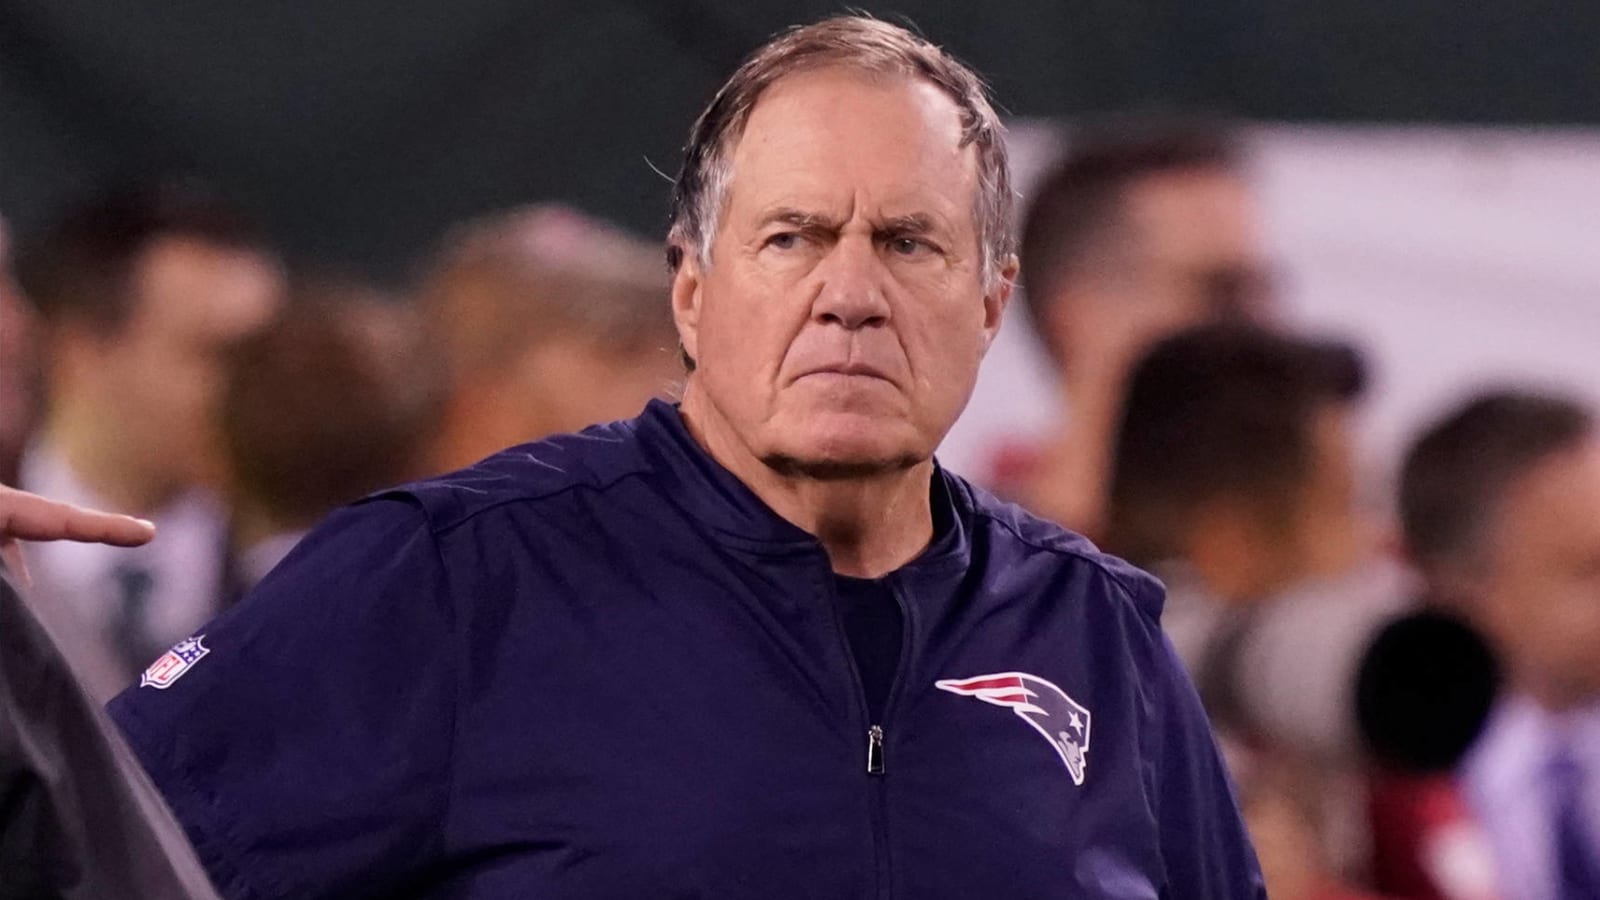 Bill Belichick furious over Patriots' videotaping incident